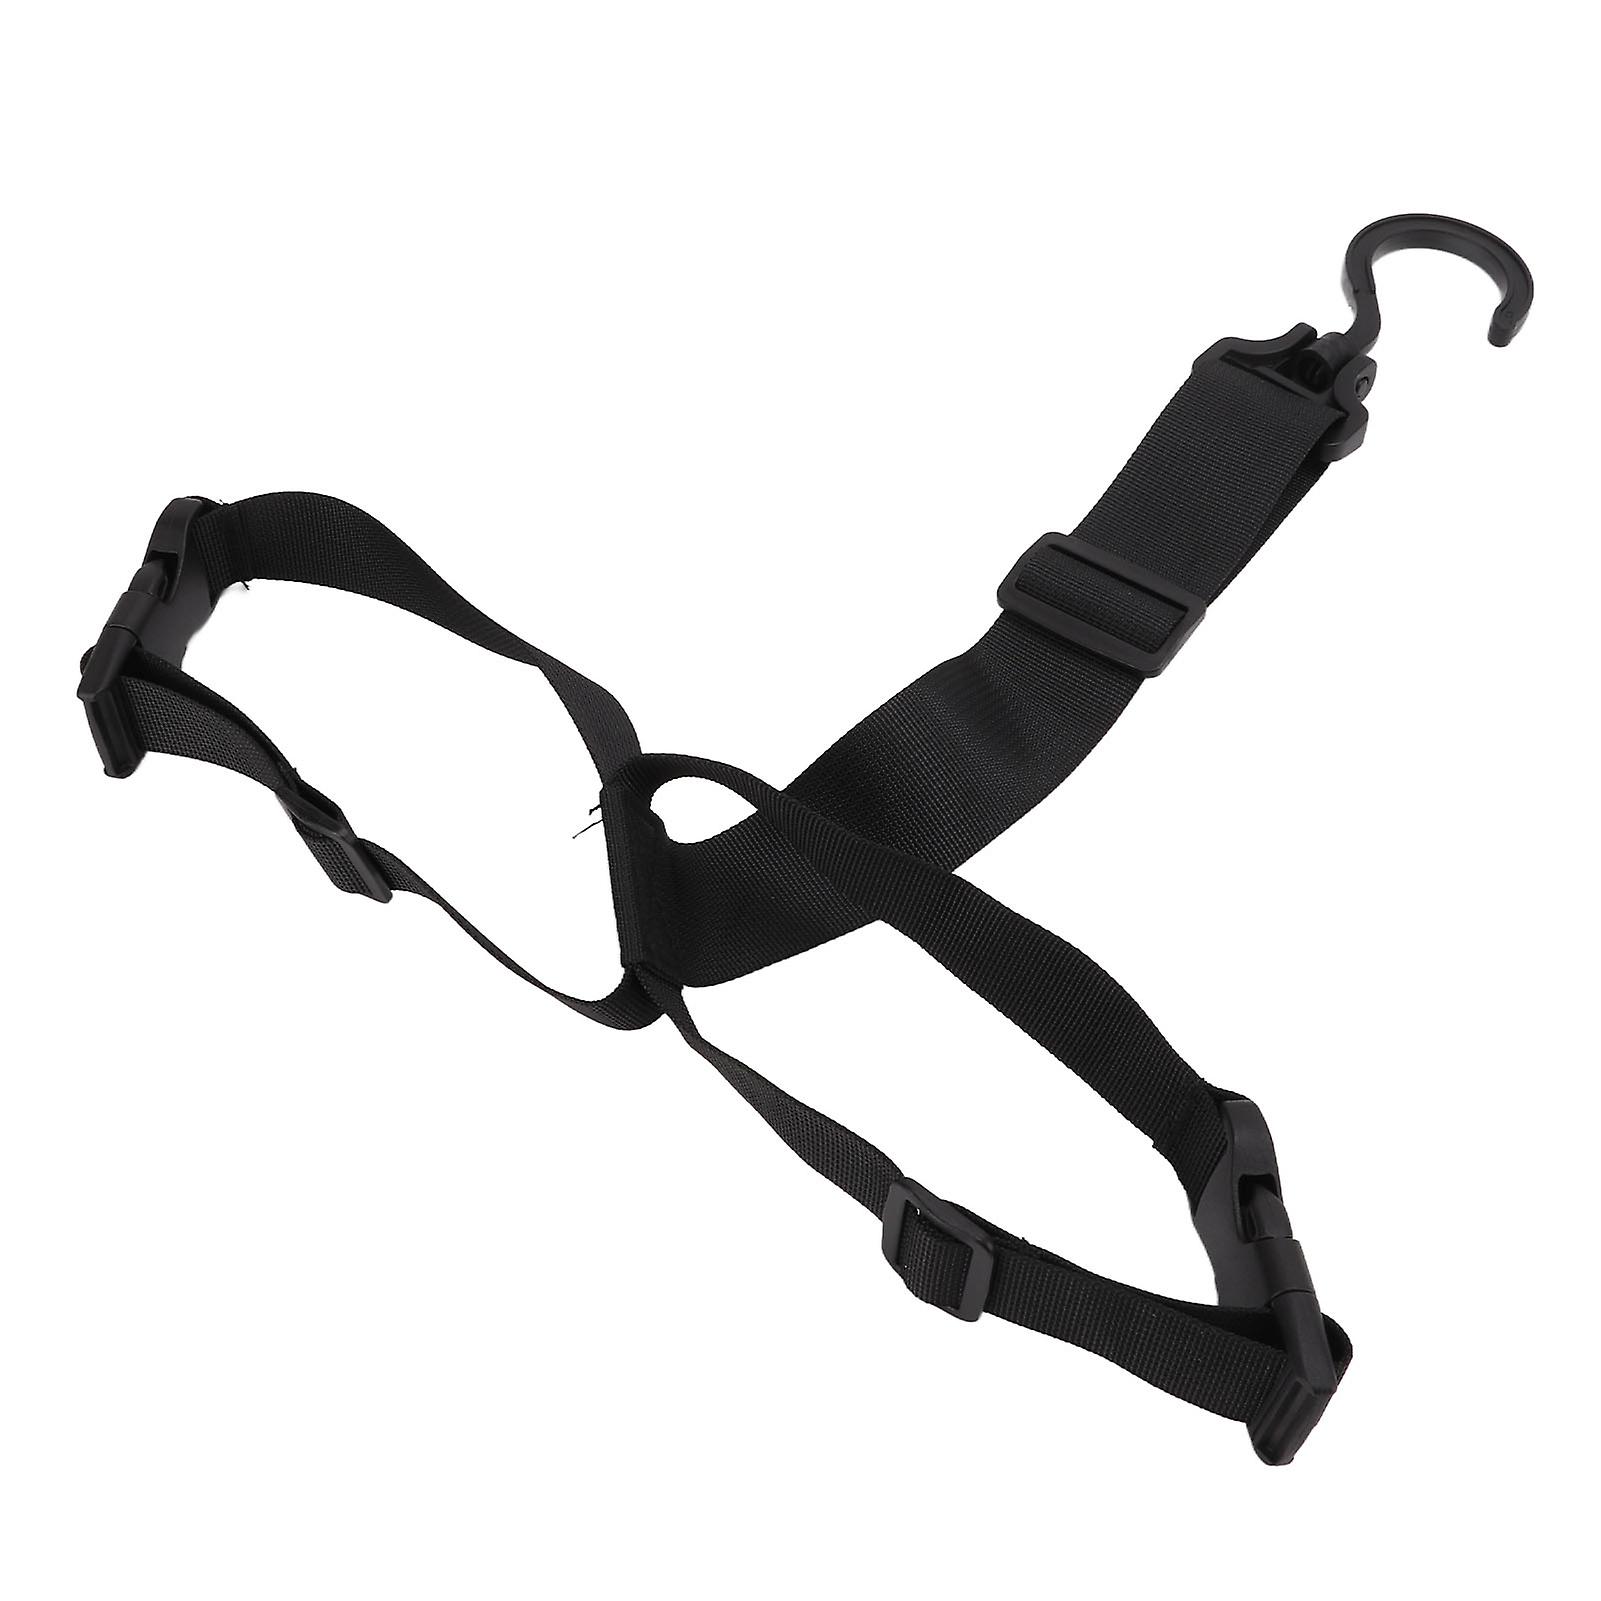 Outdoor Fishing Wader Boot Hanger 360 Rotating Buckle Adjustable Wader Boots Strap For Fishing